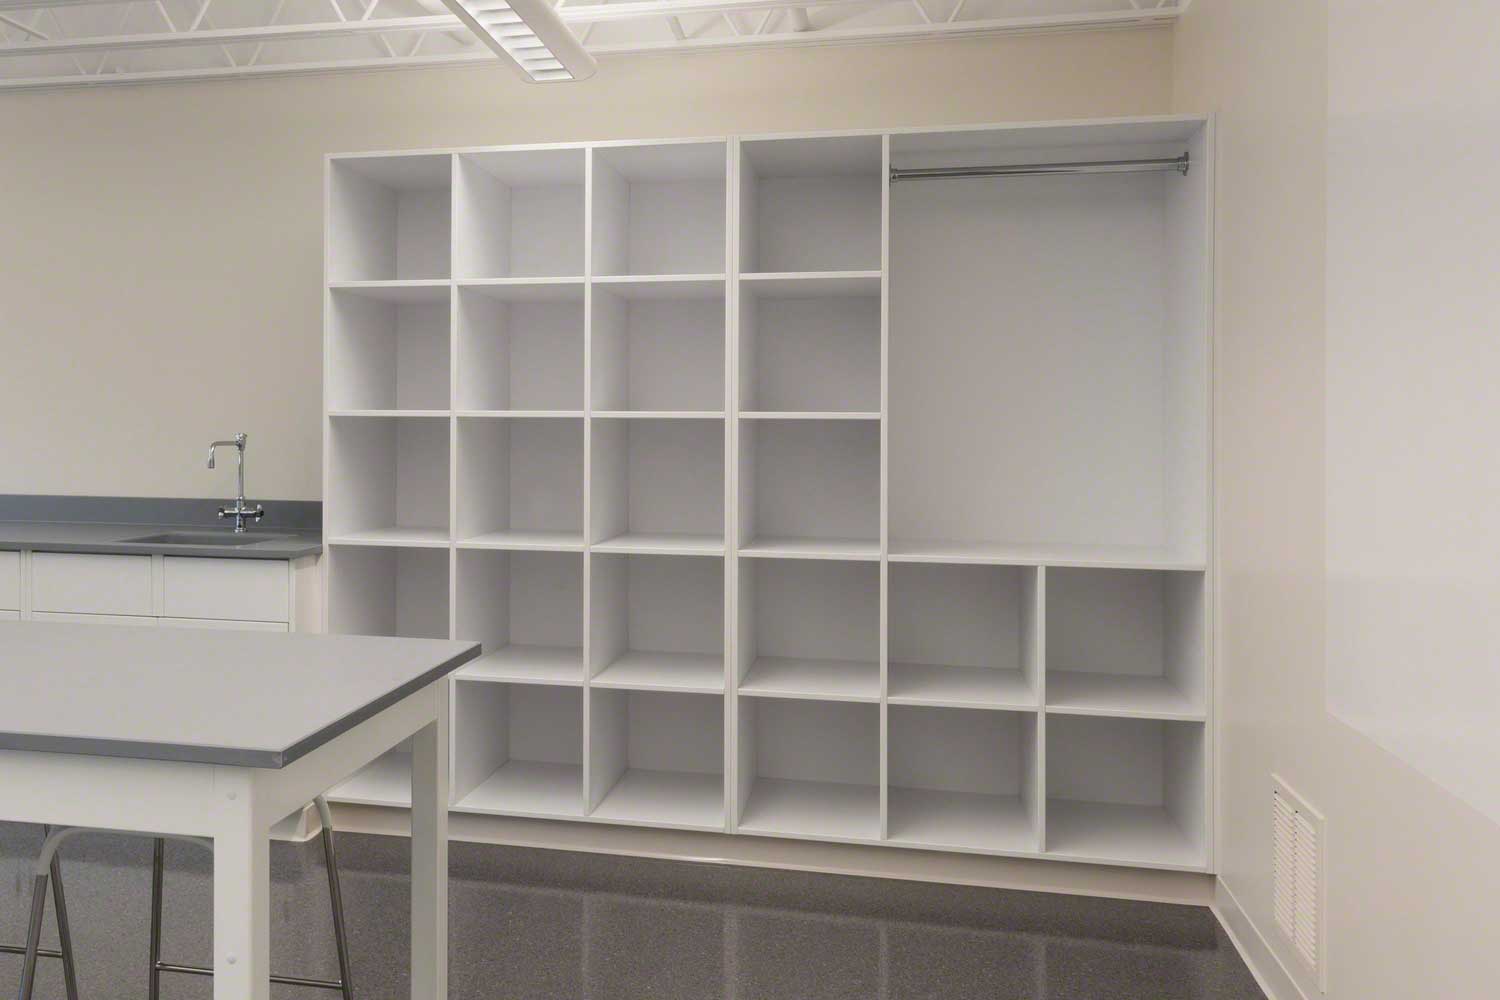 Cubby storage unit Commercial Casework and Cabinets